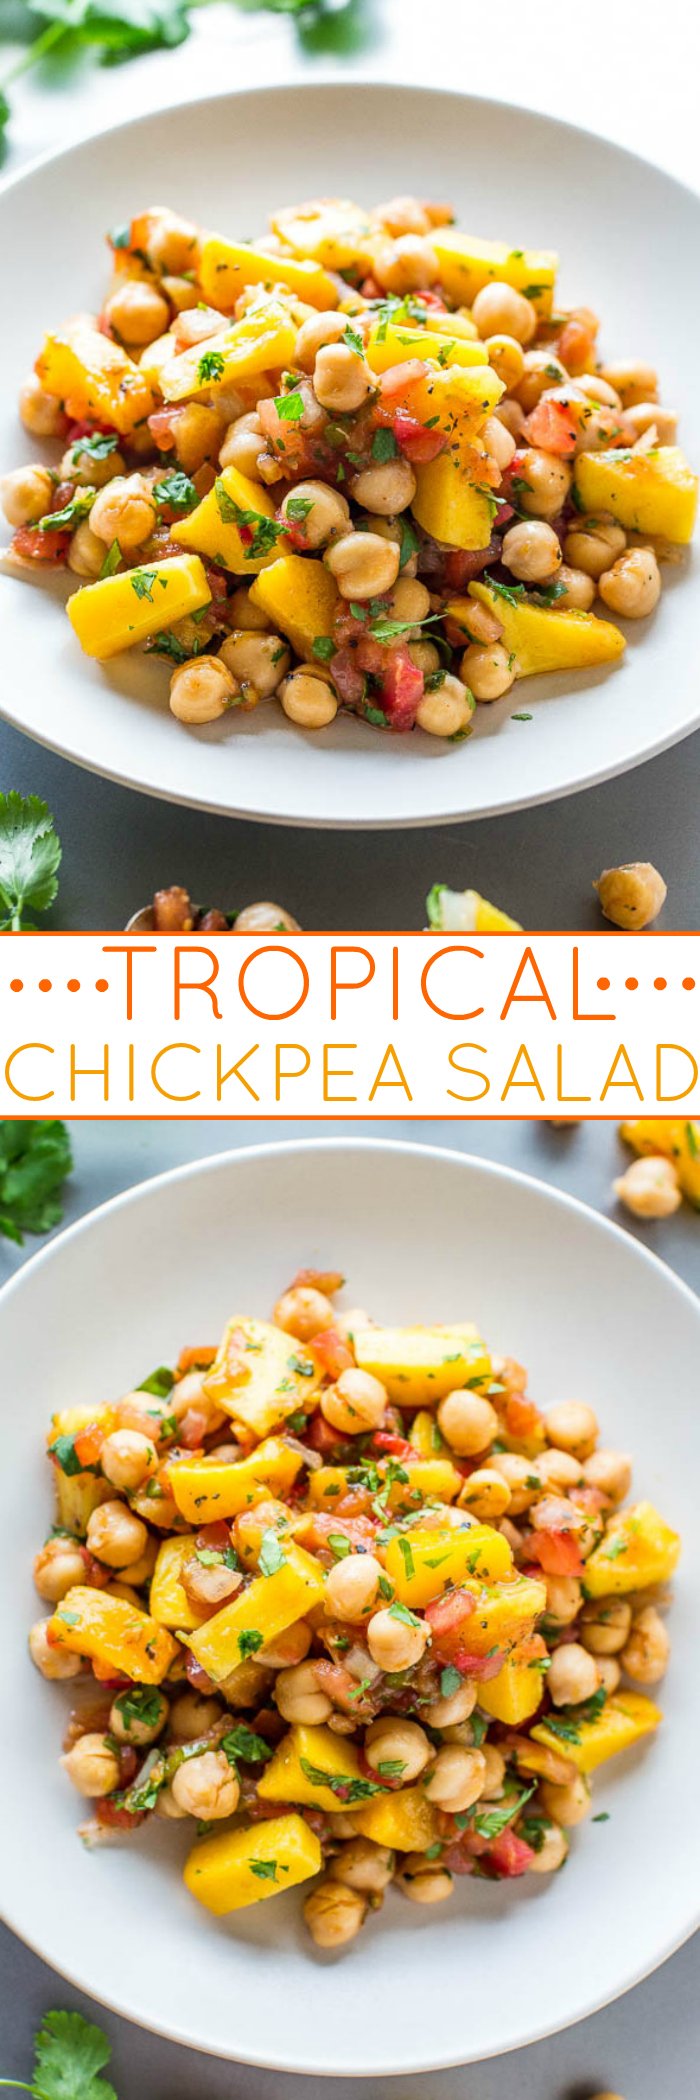 Tropical Chickpea Salad - Pineapple, mango, pineapple salsa, and pico de gallo tossed with chickpeas for a salad that tastes like a tropical vacation!! Easy, ready in 5 minutes, loaded with sweet-yet-savory flavor, and so healthy!!